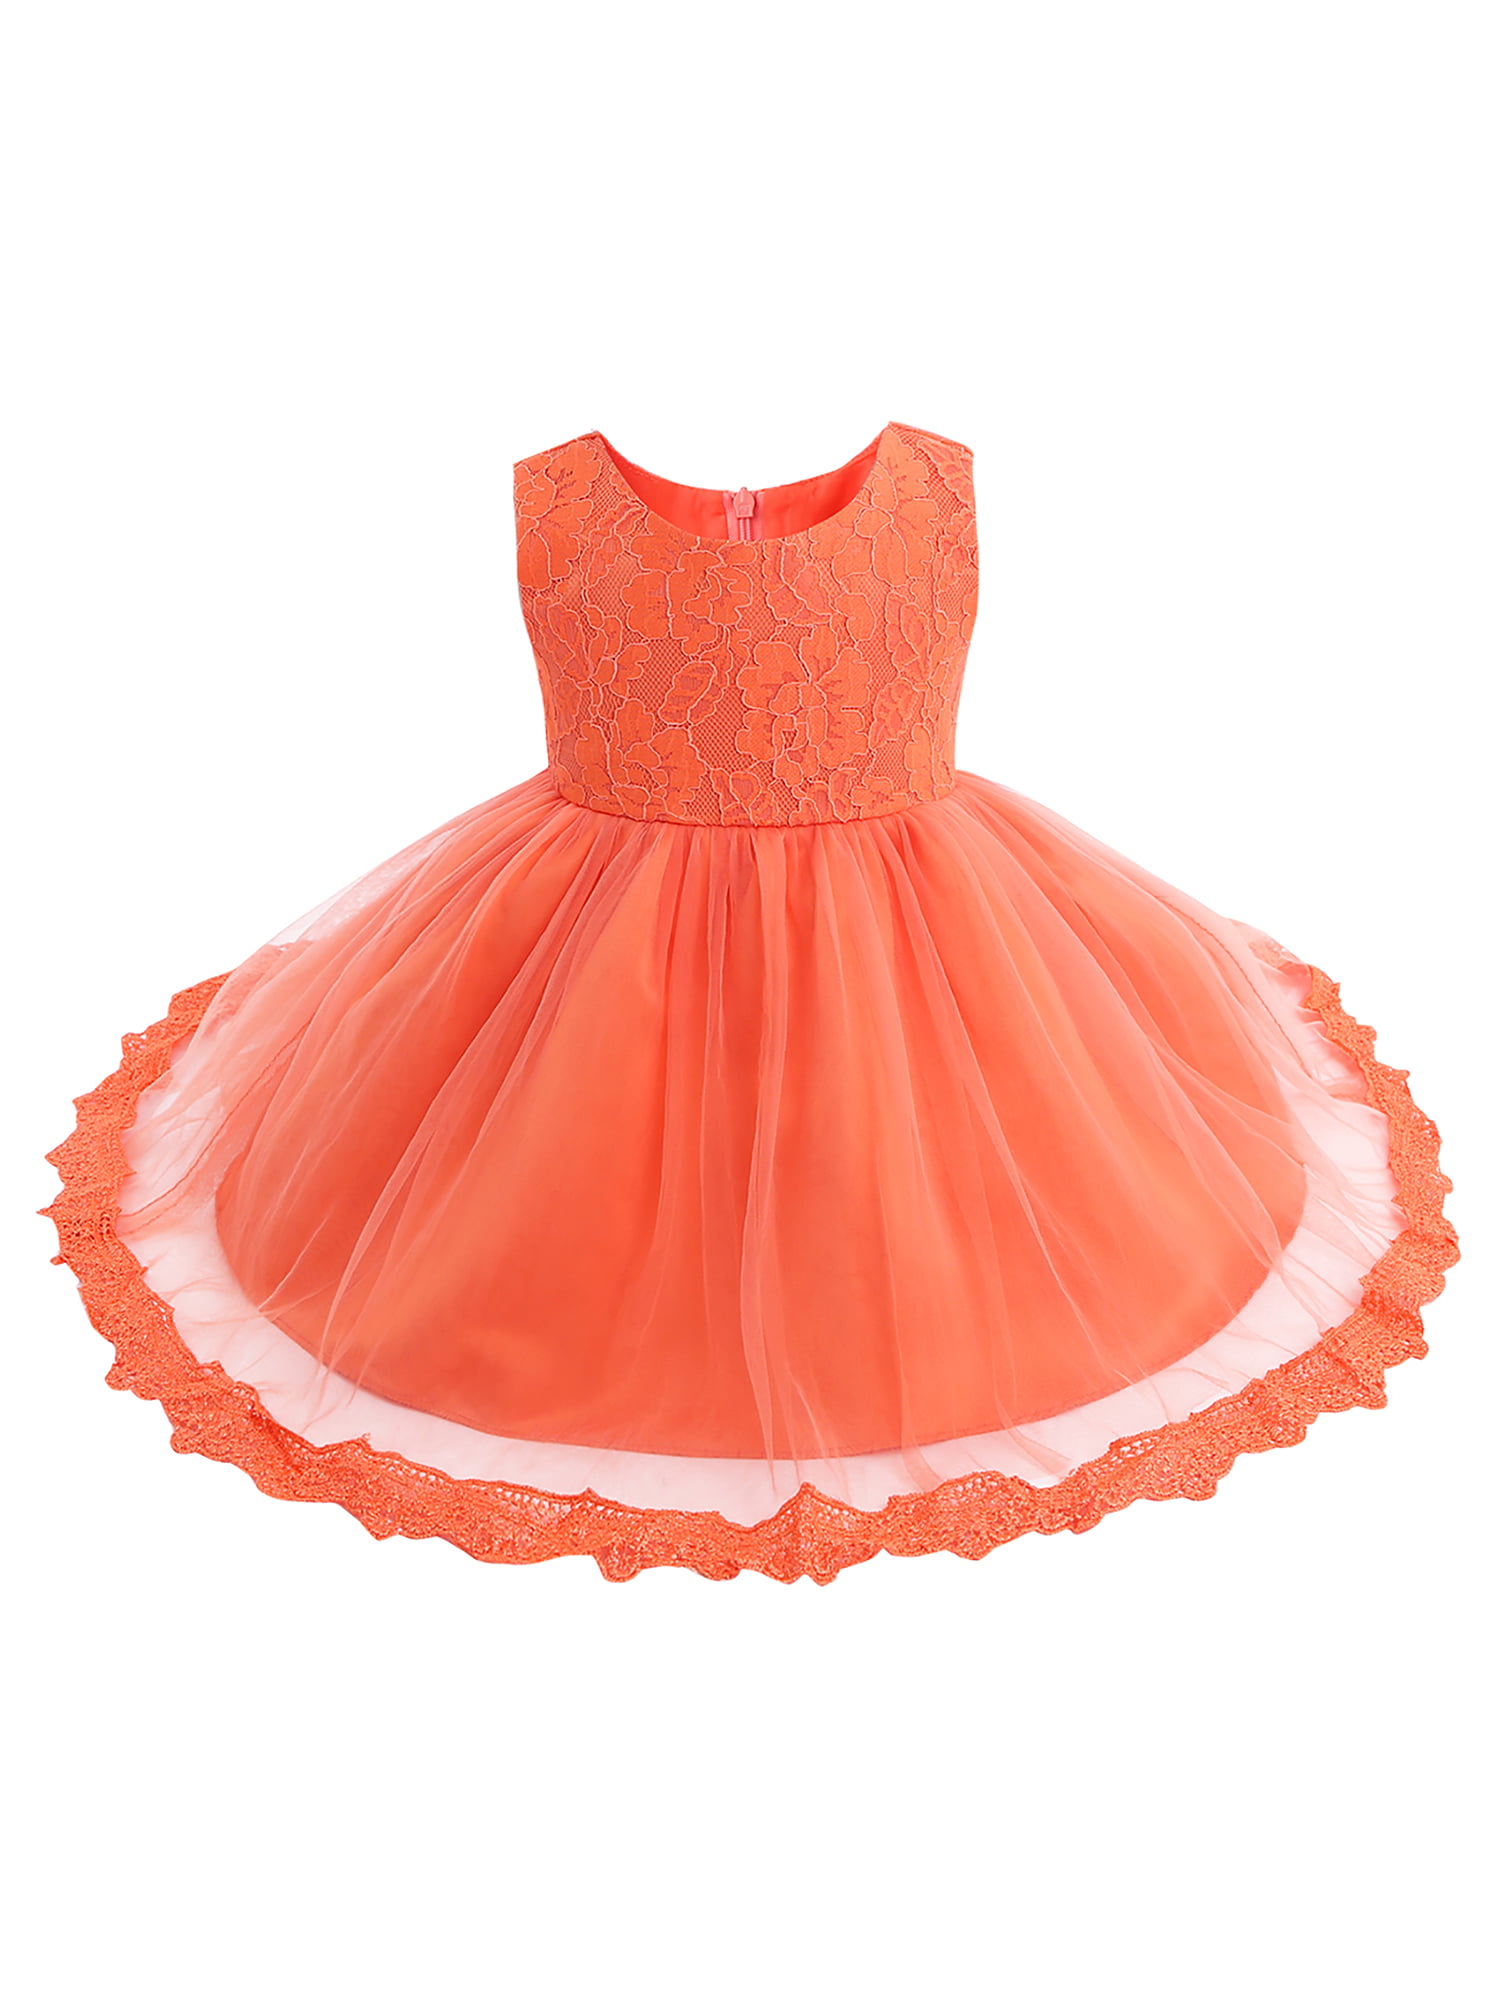 Details about   Princess Baby Girls Floral Dress Lace Wedding Bridesmaid Princess Party Pageant 